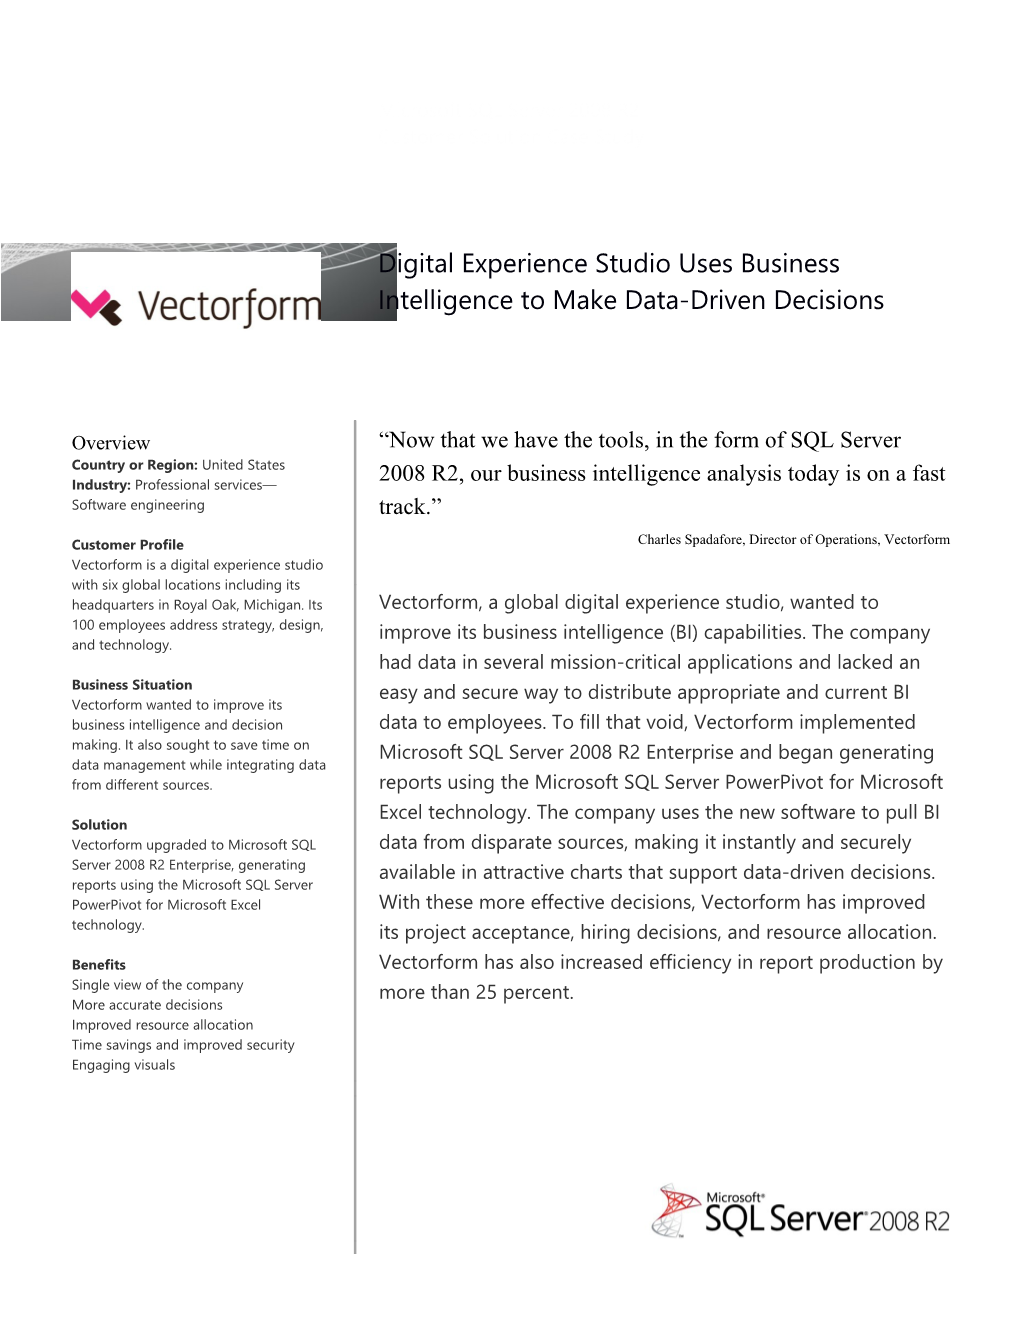 Digital Experience Studio Uses Business Intelligence to Make Data-Driven Decisions